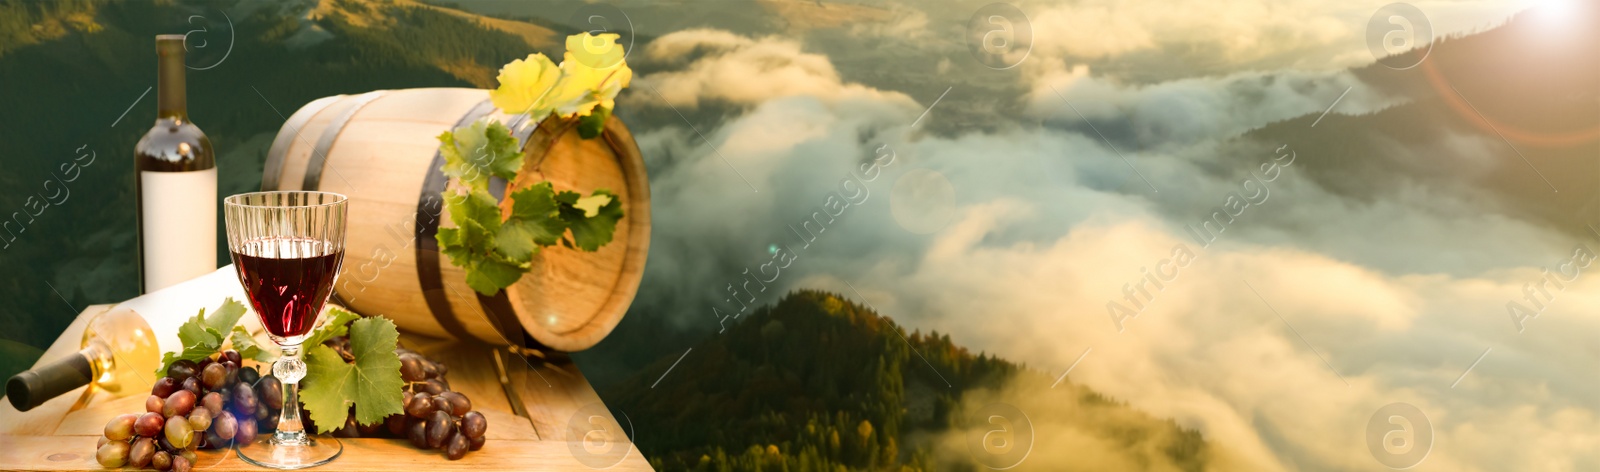 Image of Tasty wine, grapes and barrel on wooden table against beautiful mountain landscape, space for text. Banner design